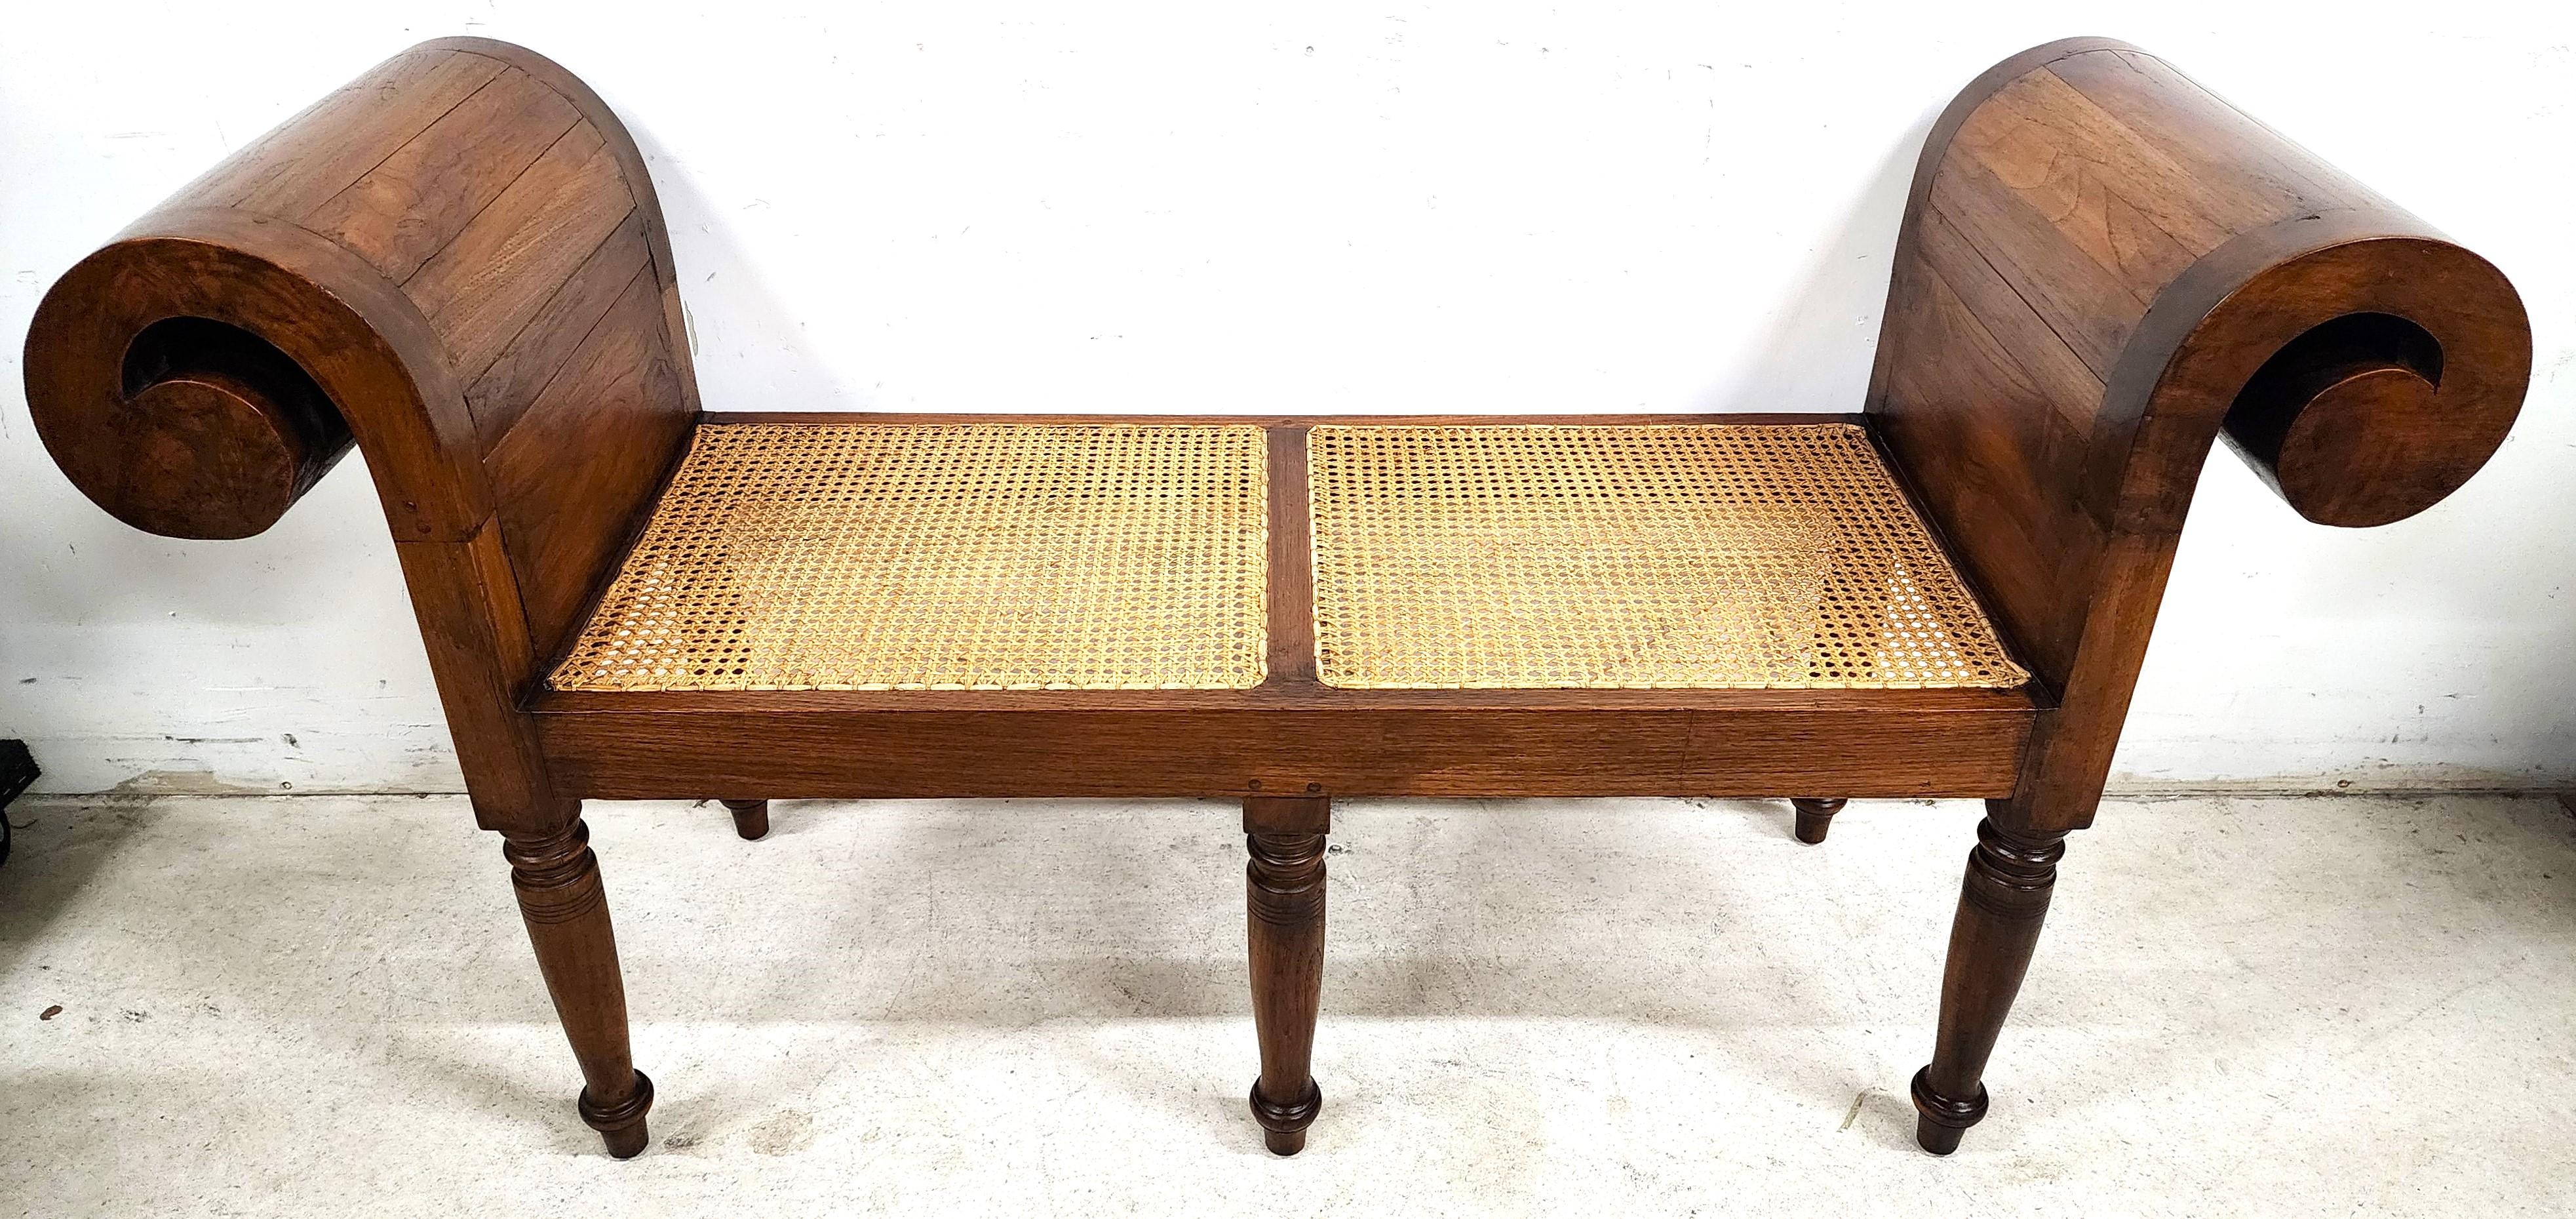 For FULL item description click on CONTINUE READING at the bottom of this page.

Offering One Of Our Recent Palm Beach Estate Fine Furniture Acquisitions Of An 
English Empire Regency Style Scroll Arm Bench with Caned Seat by BAUER